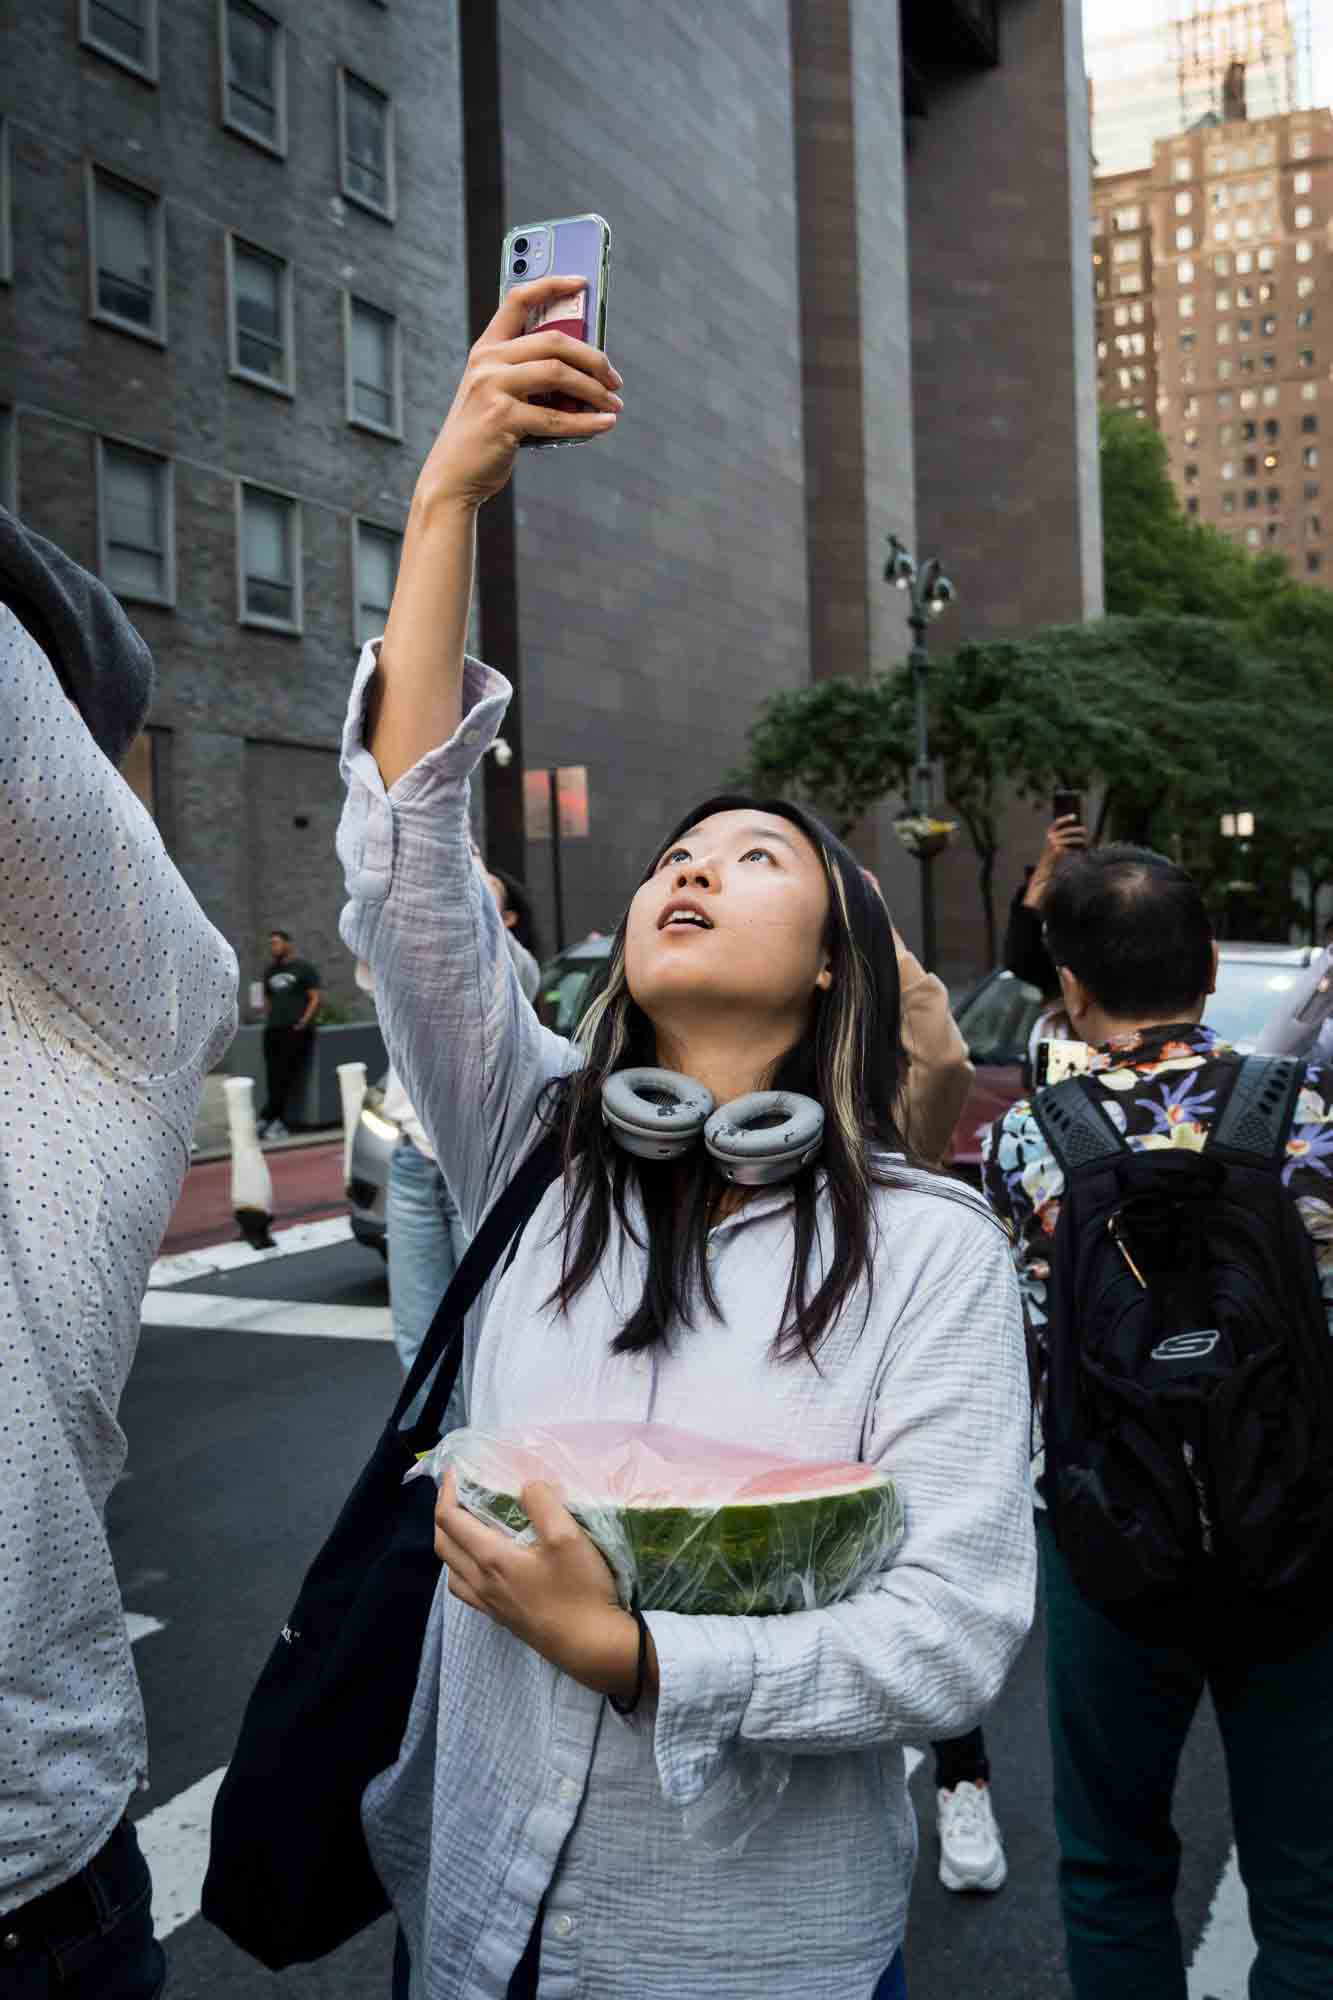 Asian woman in a NYC street with cellphones in hand during Manhattanhenge